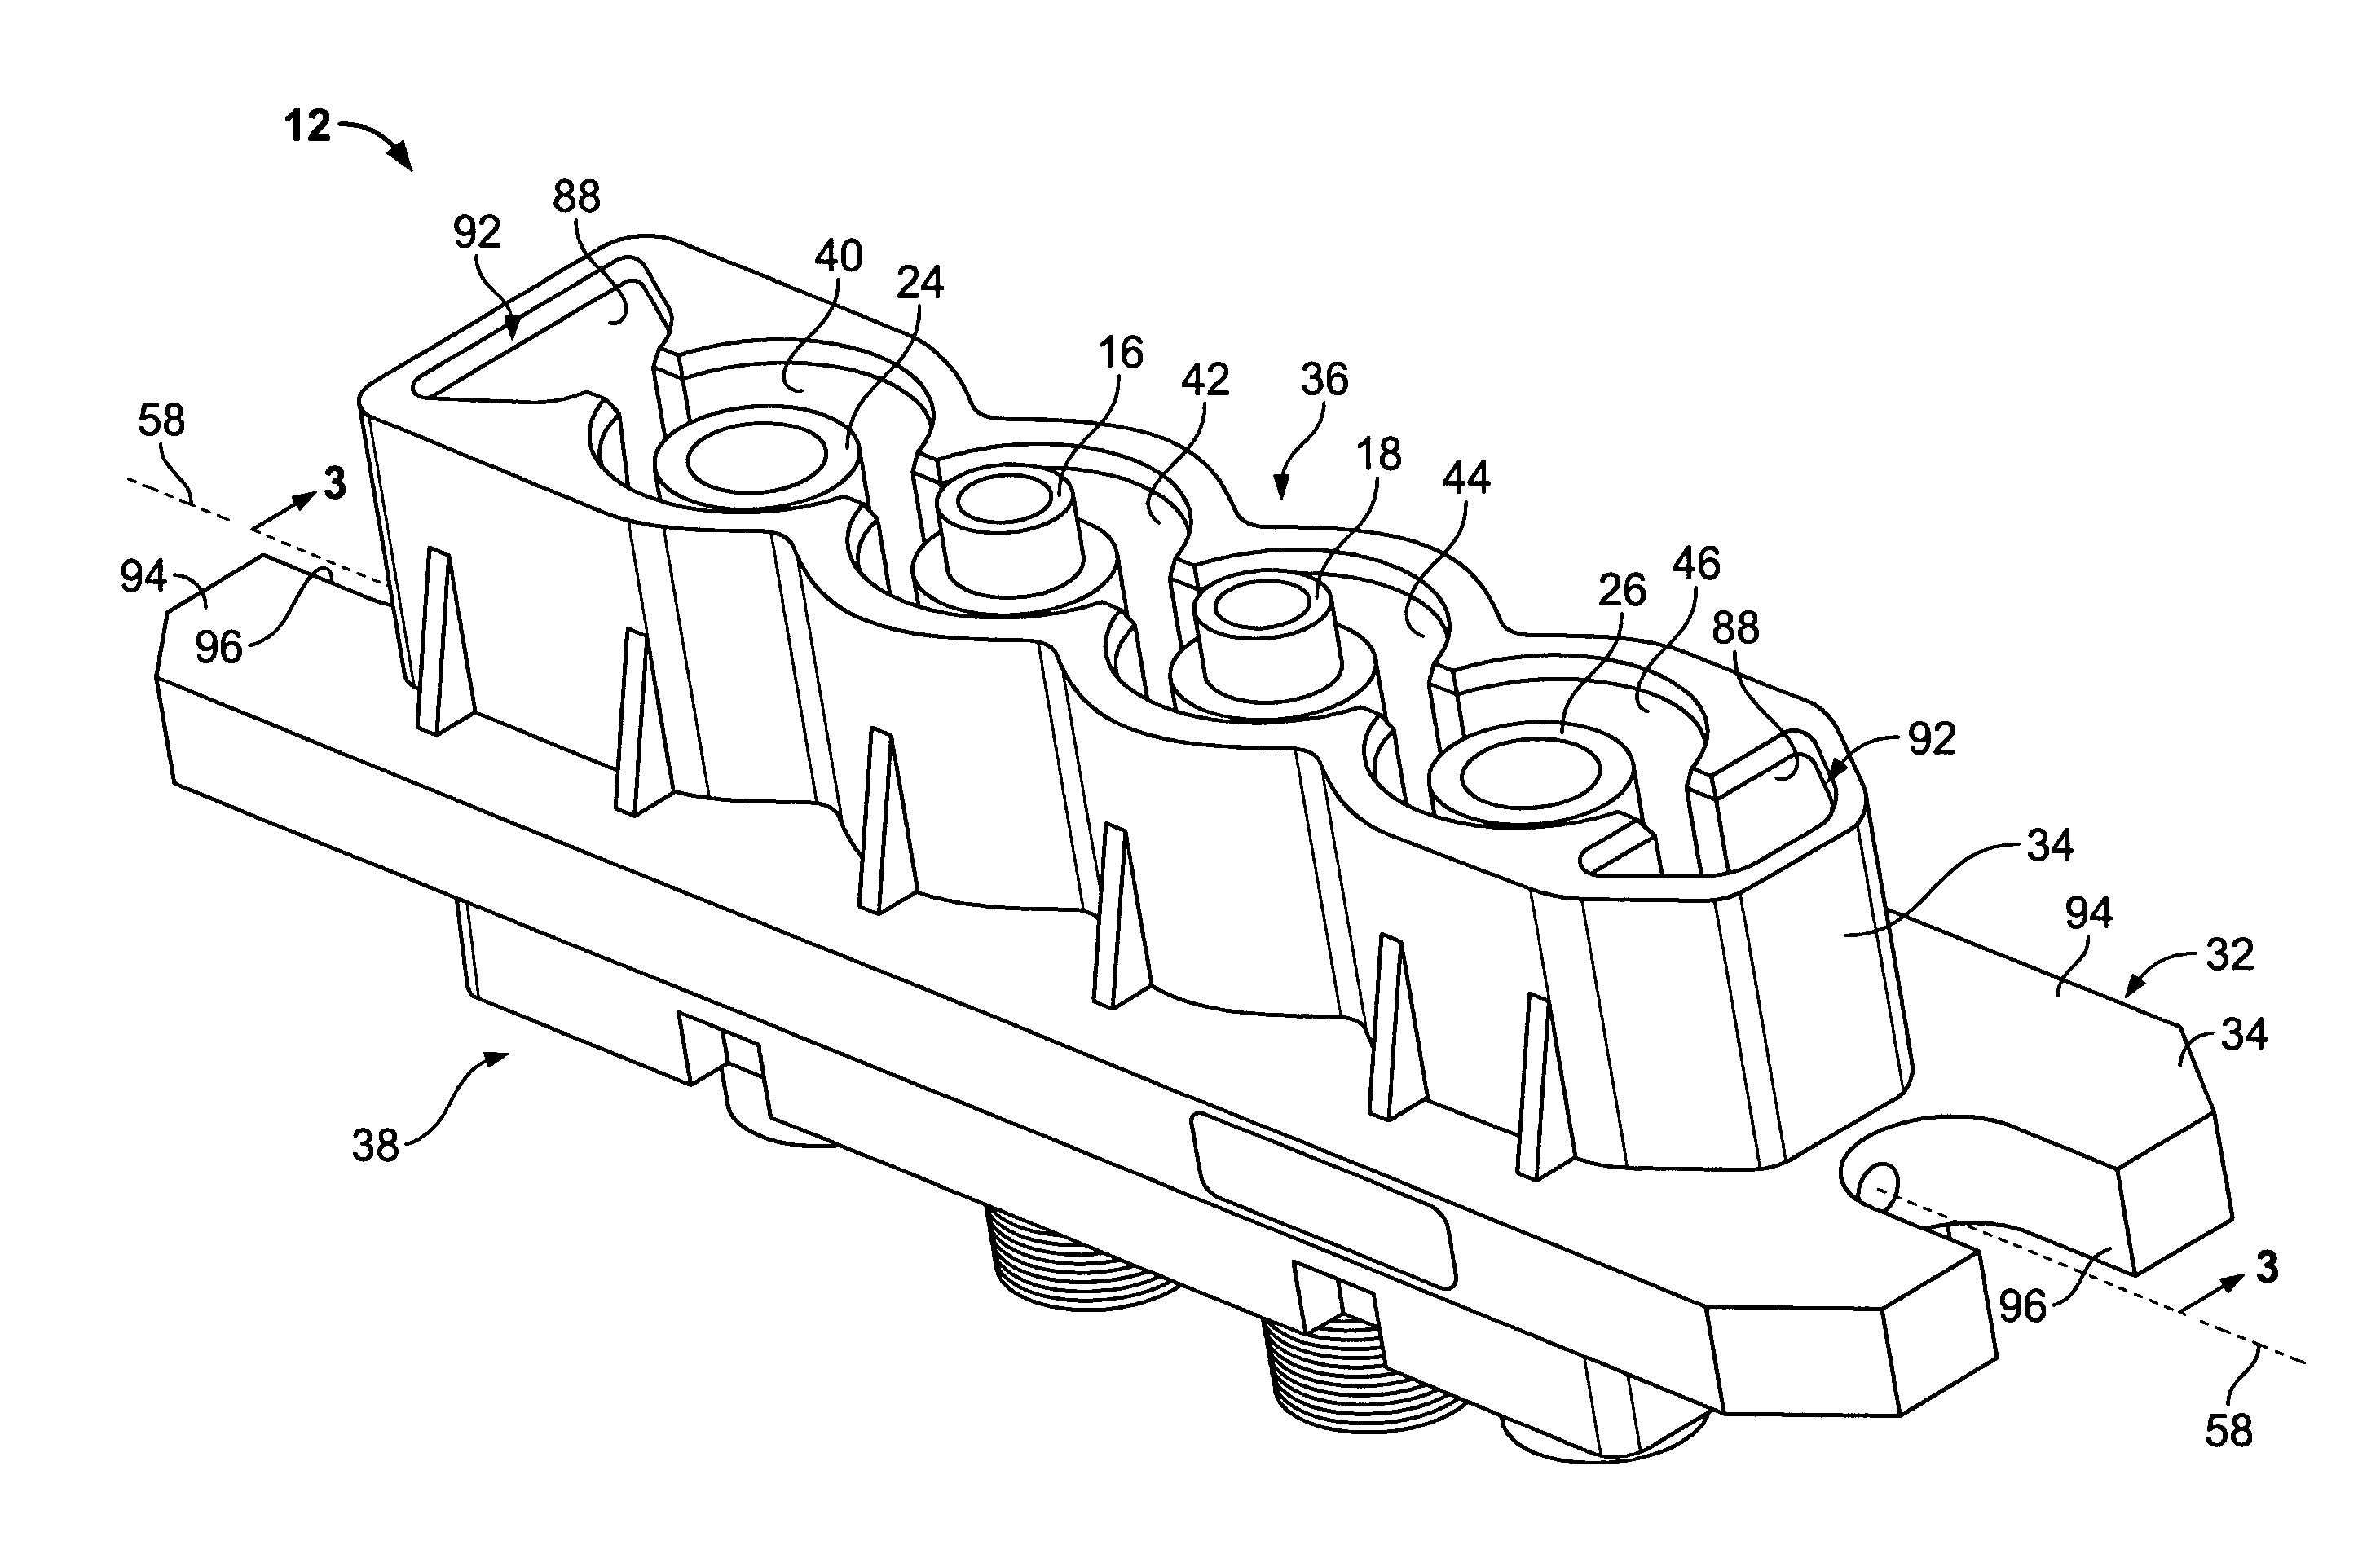 Electrical connector having a fluid coupling